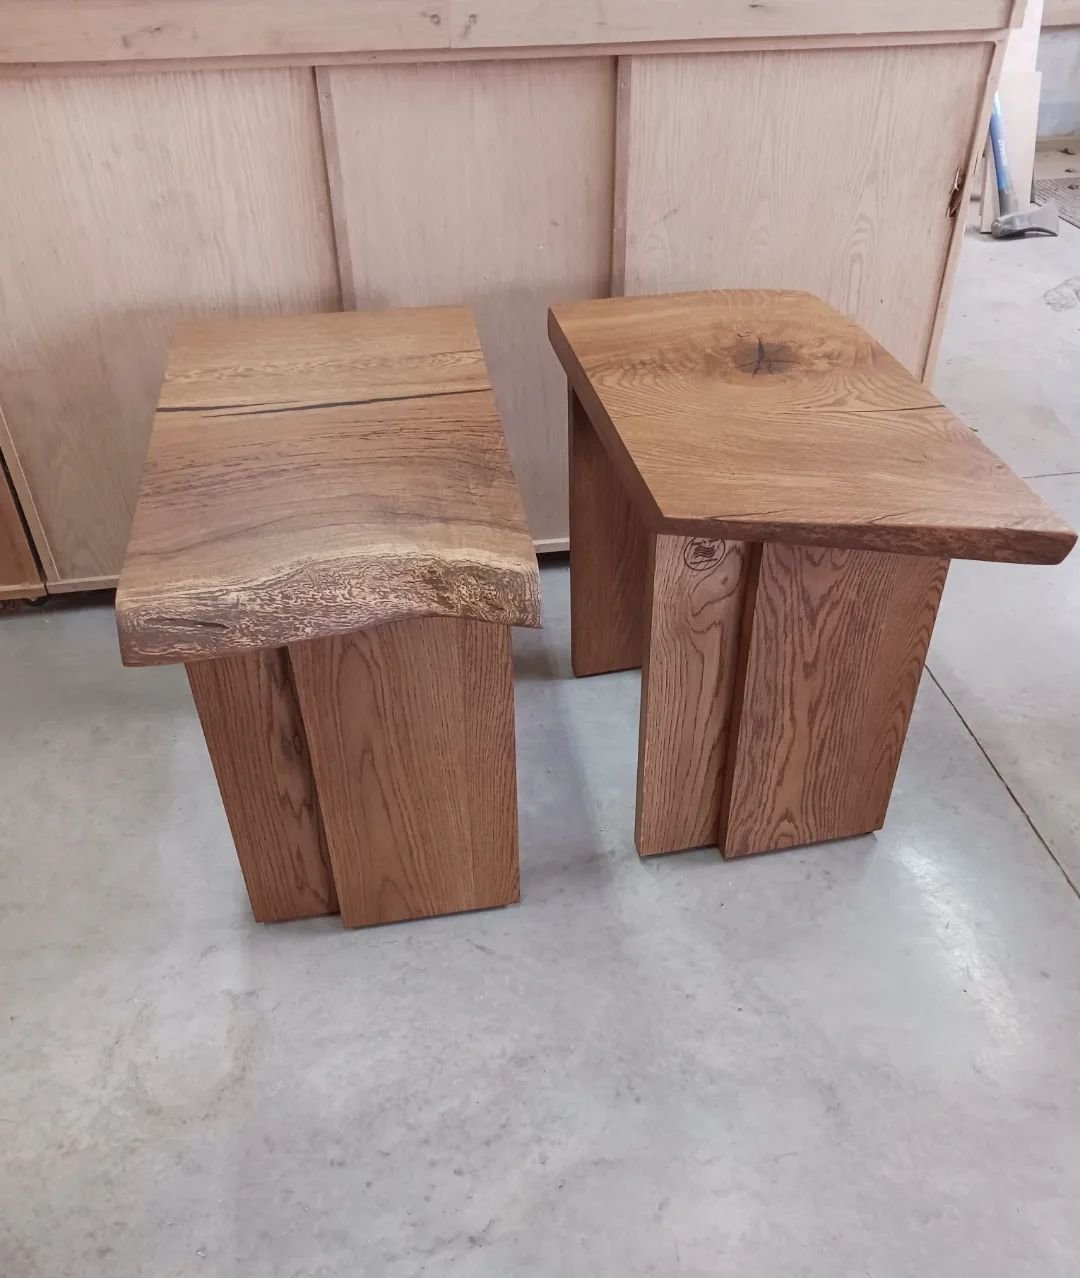 I was finally able to deliver these endtables to their new home. Wood bases are also an option for any piece of furniture that I do, not just metal! 😀

White oak finished with @odiesoil coffee 

Text me for custom orders or fill out a Project Inquir